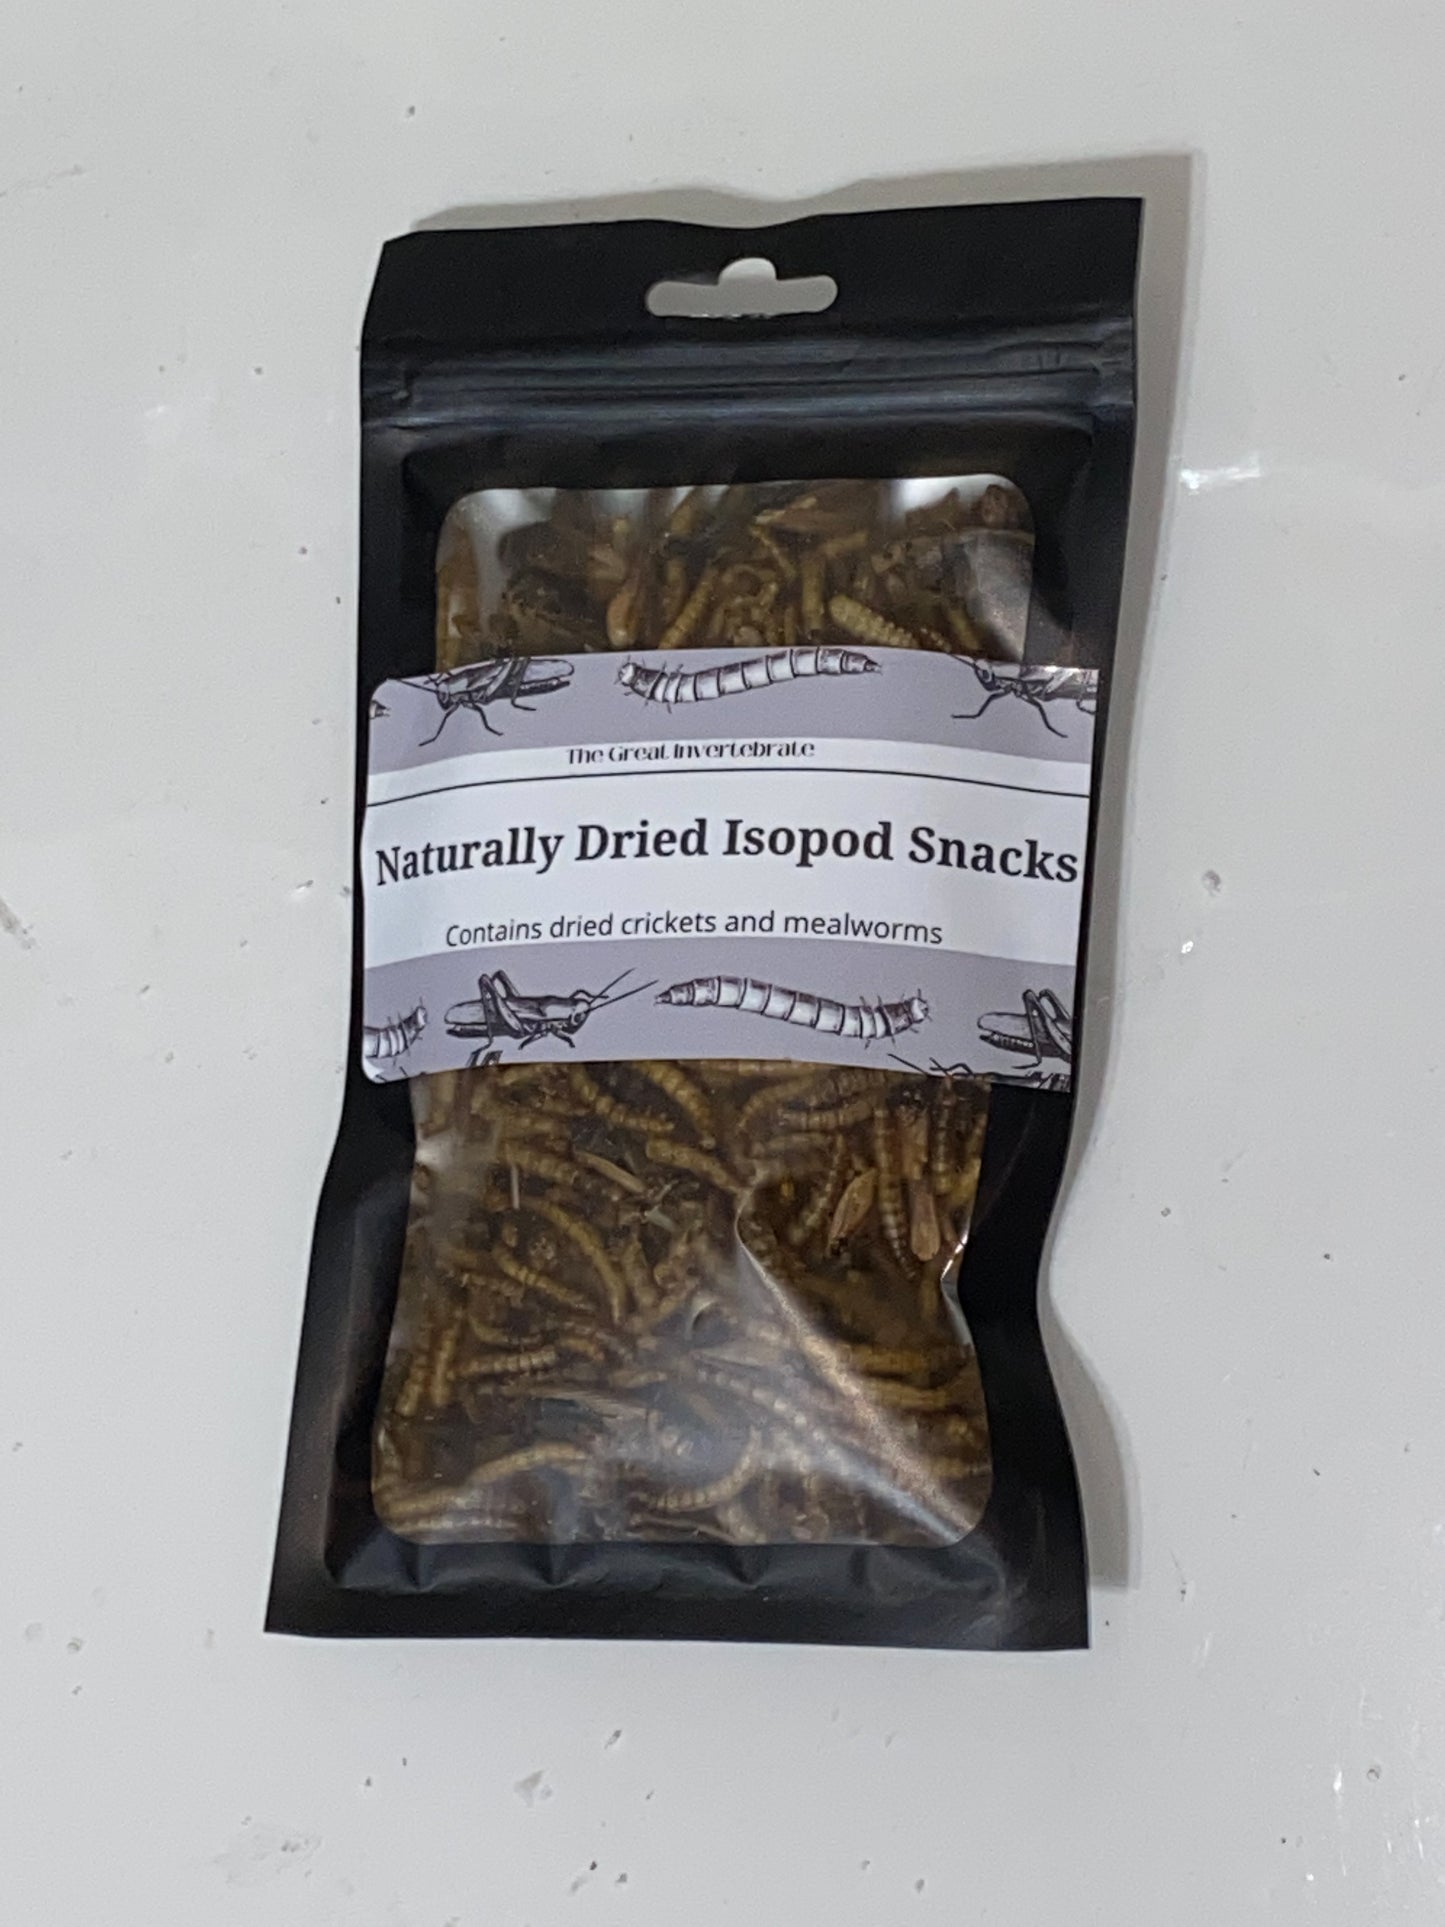 Naturally Dried Isopod Snacks - Cricket and Mealworm Blend.